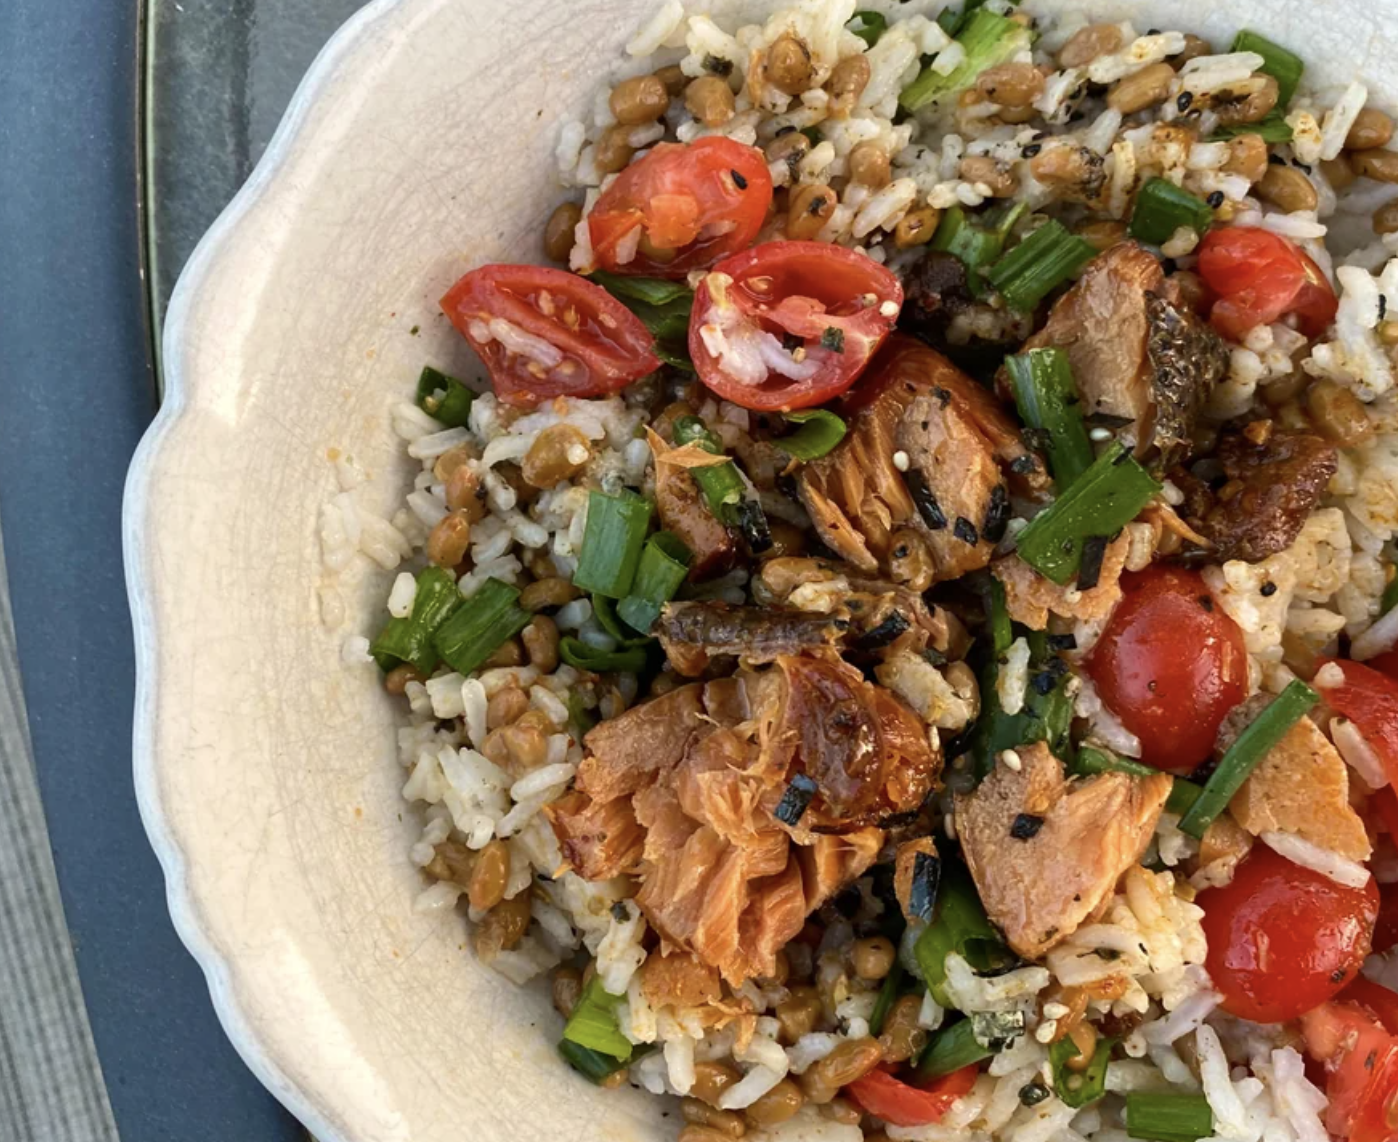 Bowl of rice with vegetables, chicken, and sliced tomatoes